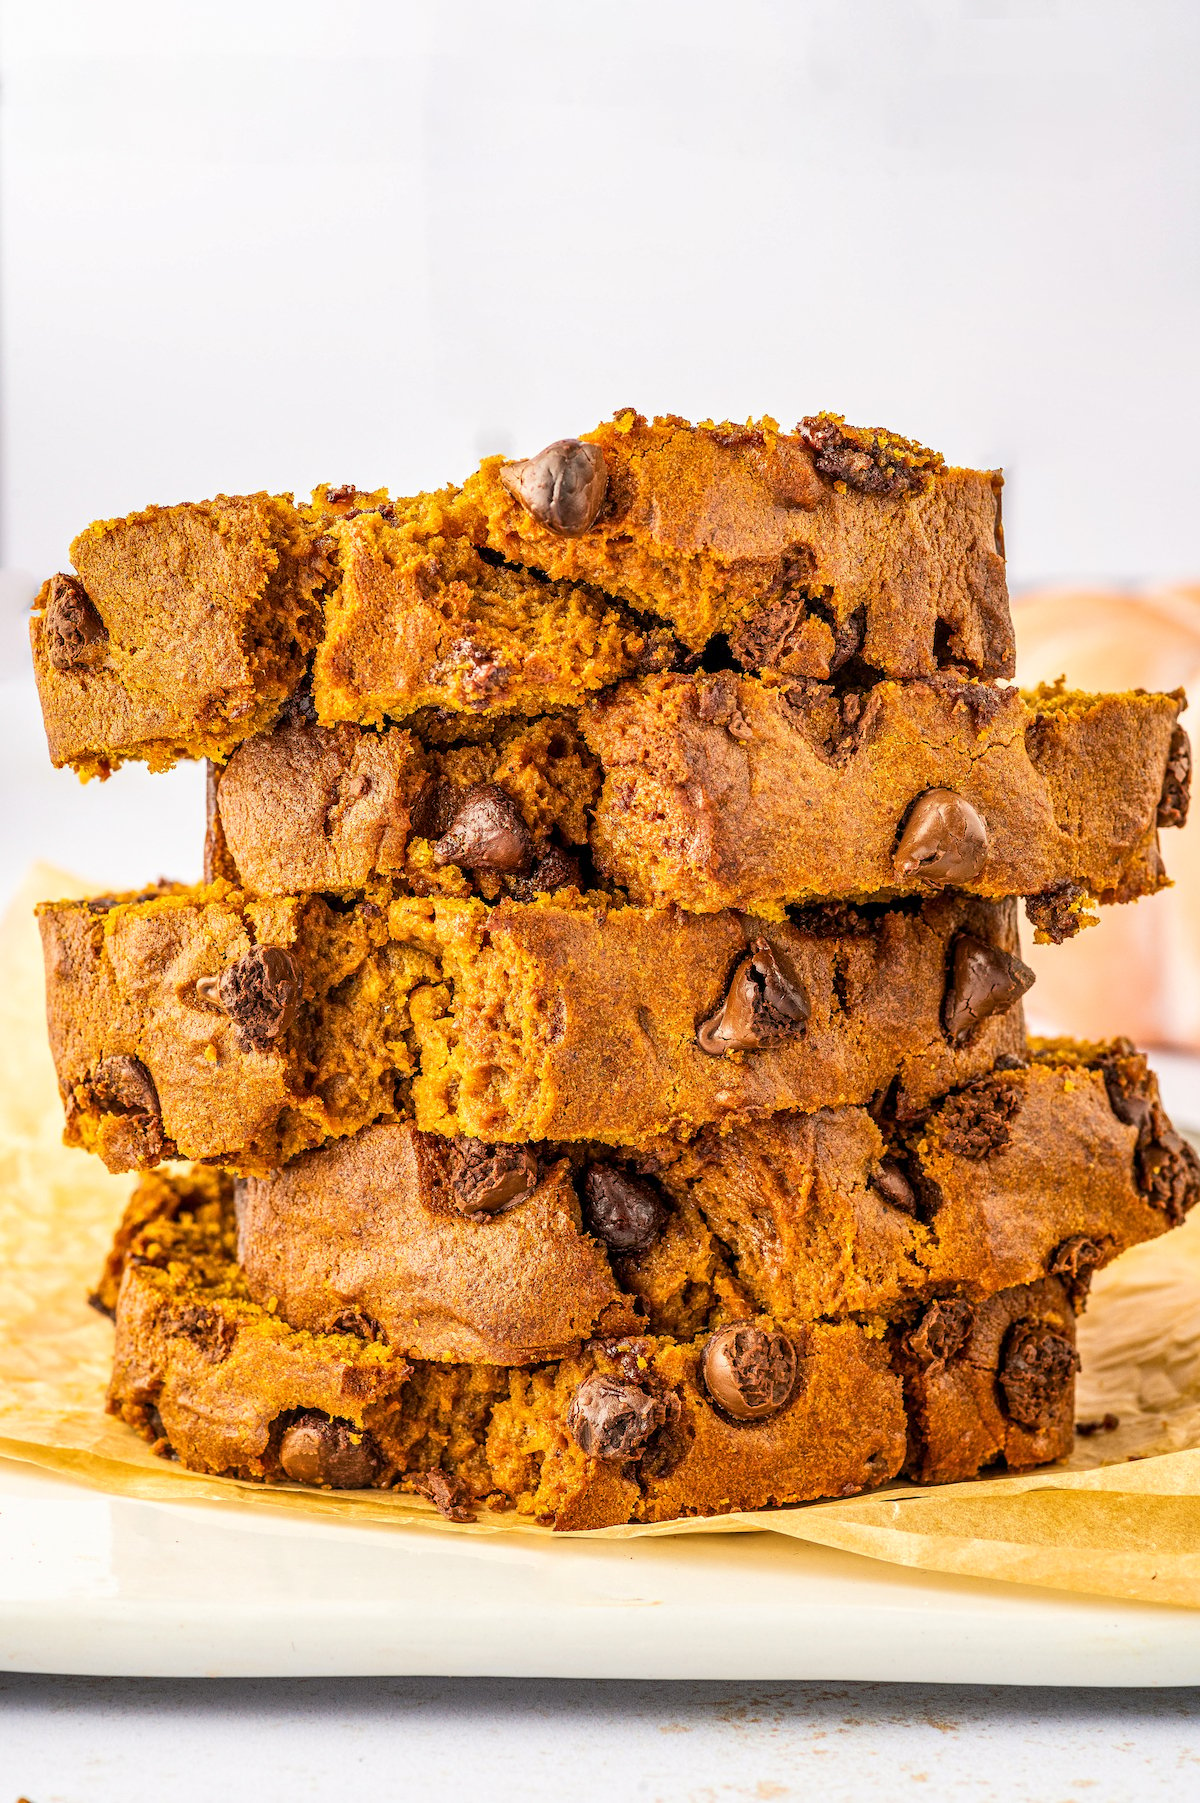 Slices of pumpkin chocolate chip bread stacked on top of each other.